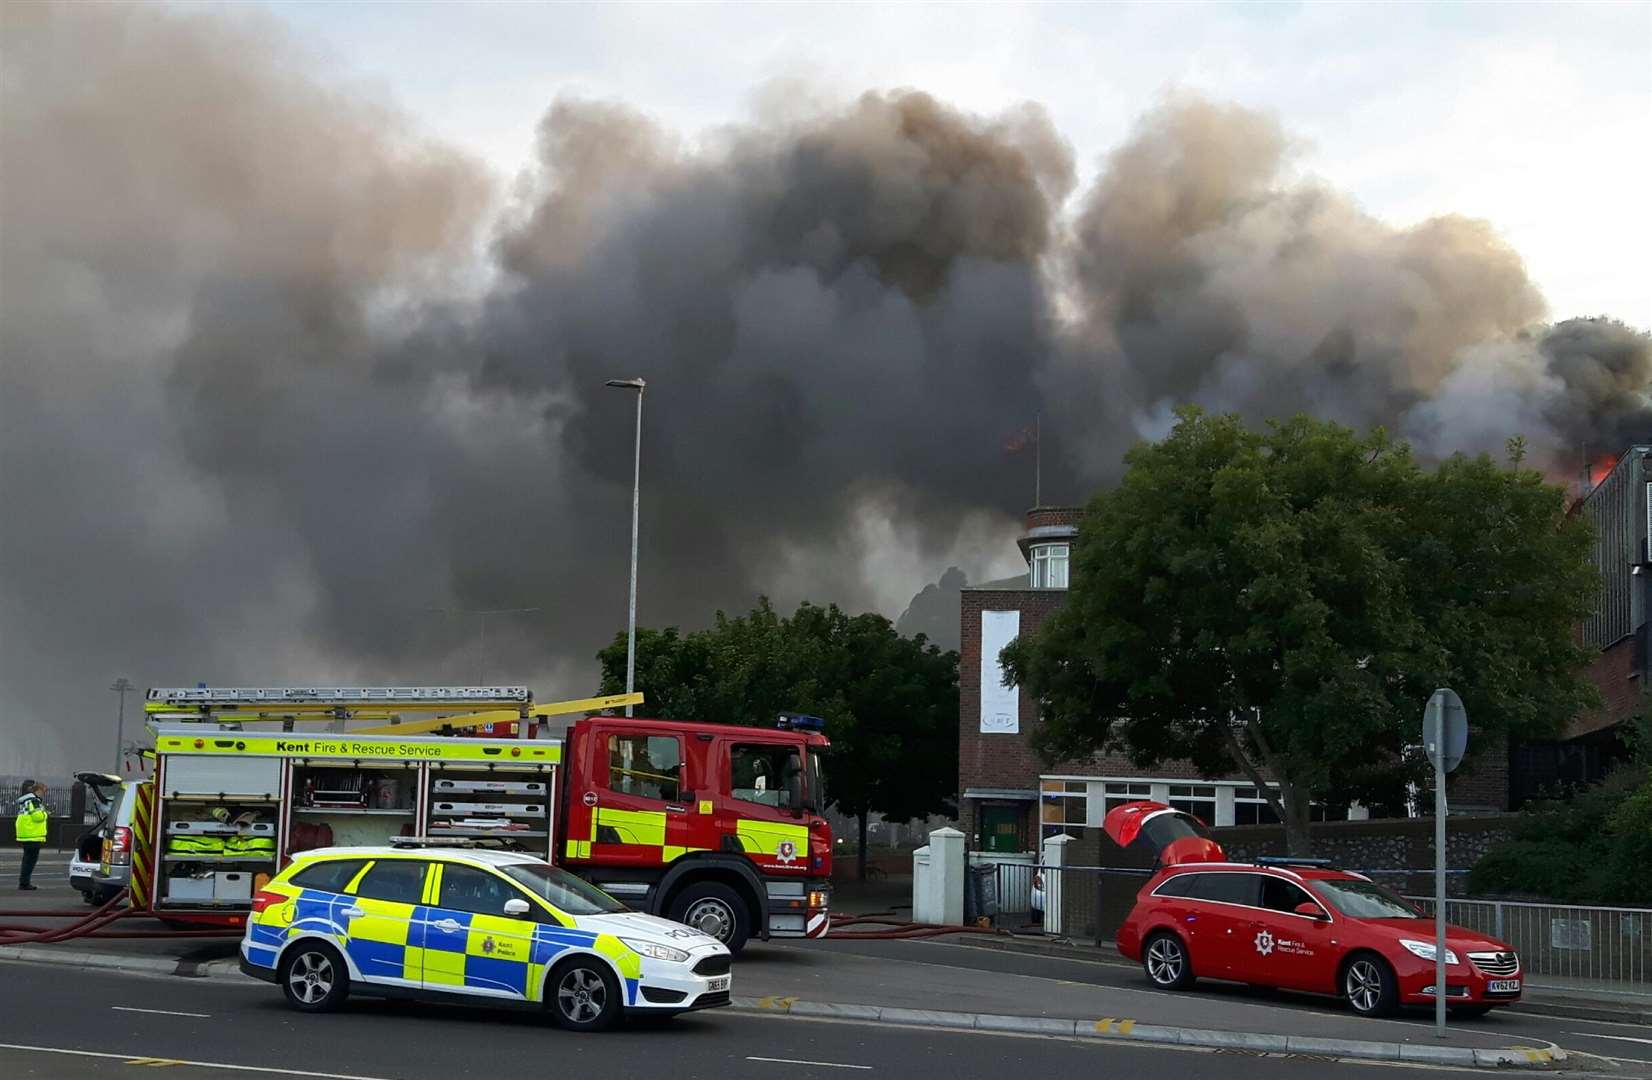 The second fire caused huge thick smoke